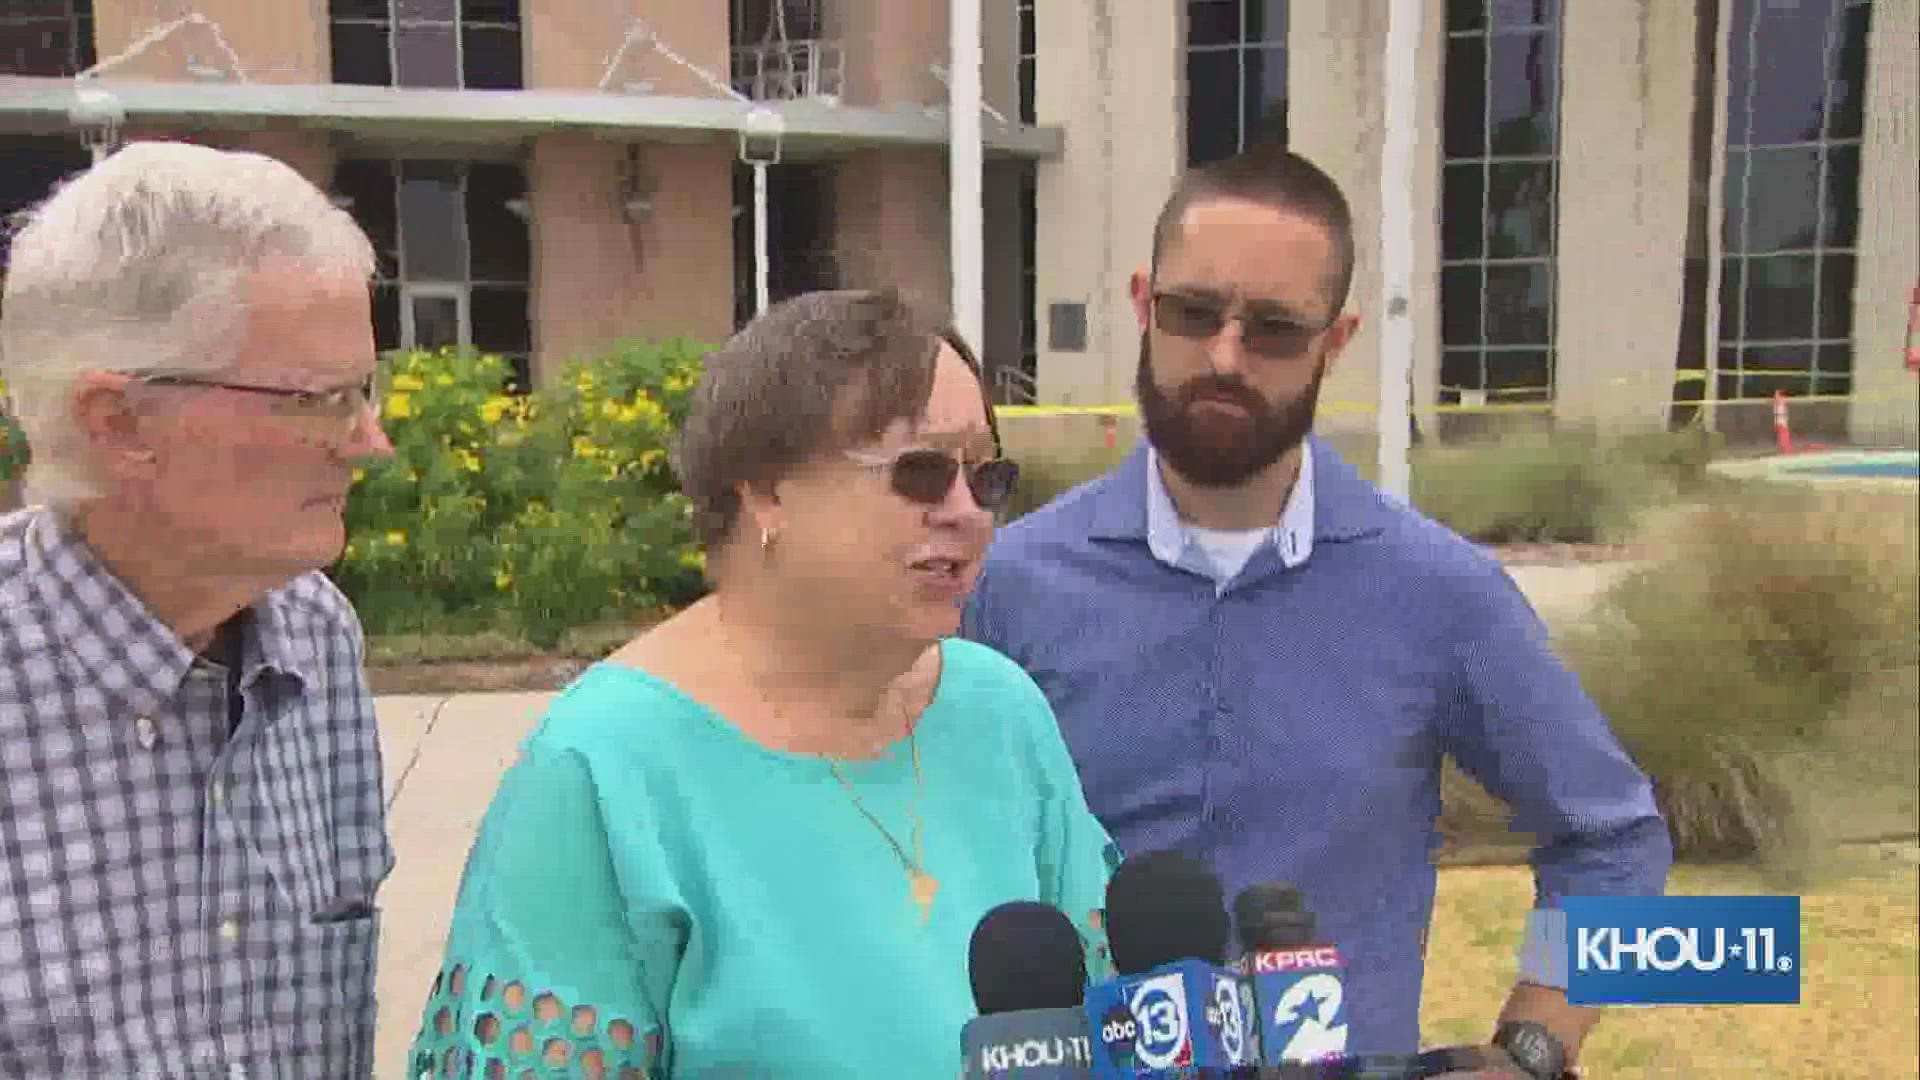 With her husband and son by her side, Gay Smither said she feels peace now that William Reece has been sentenced to life for killing Laura and Jessica Cain.